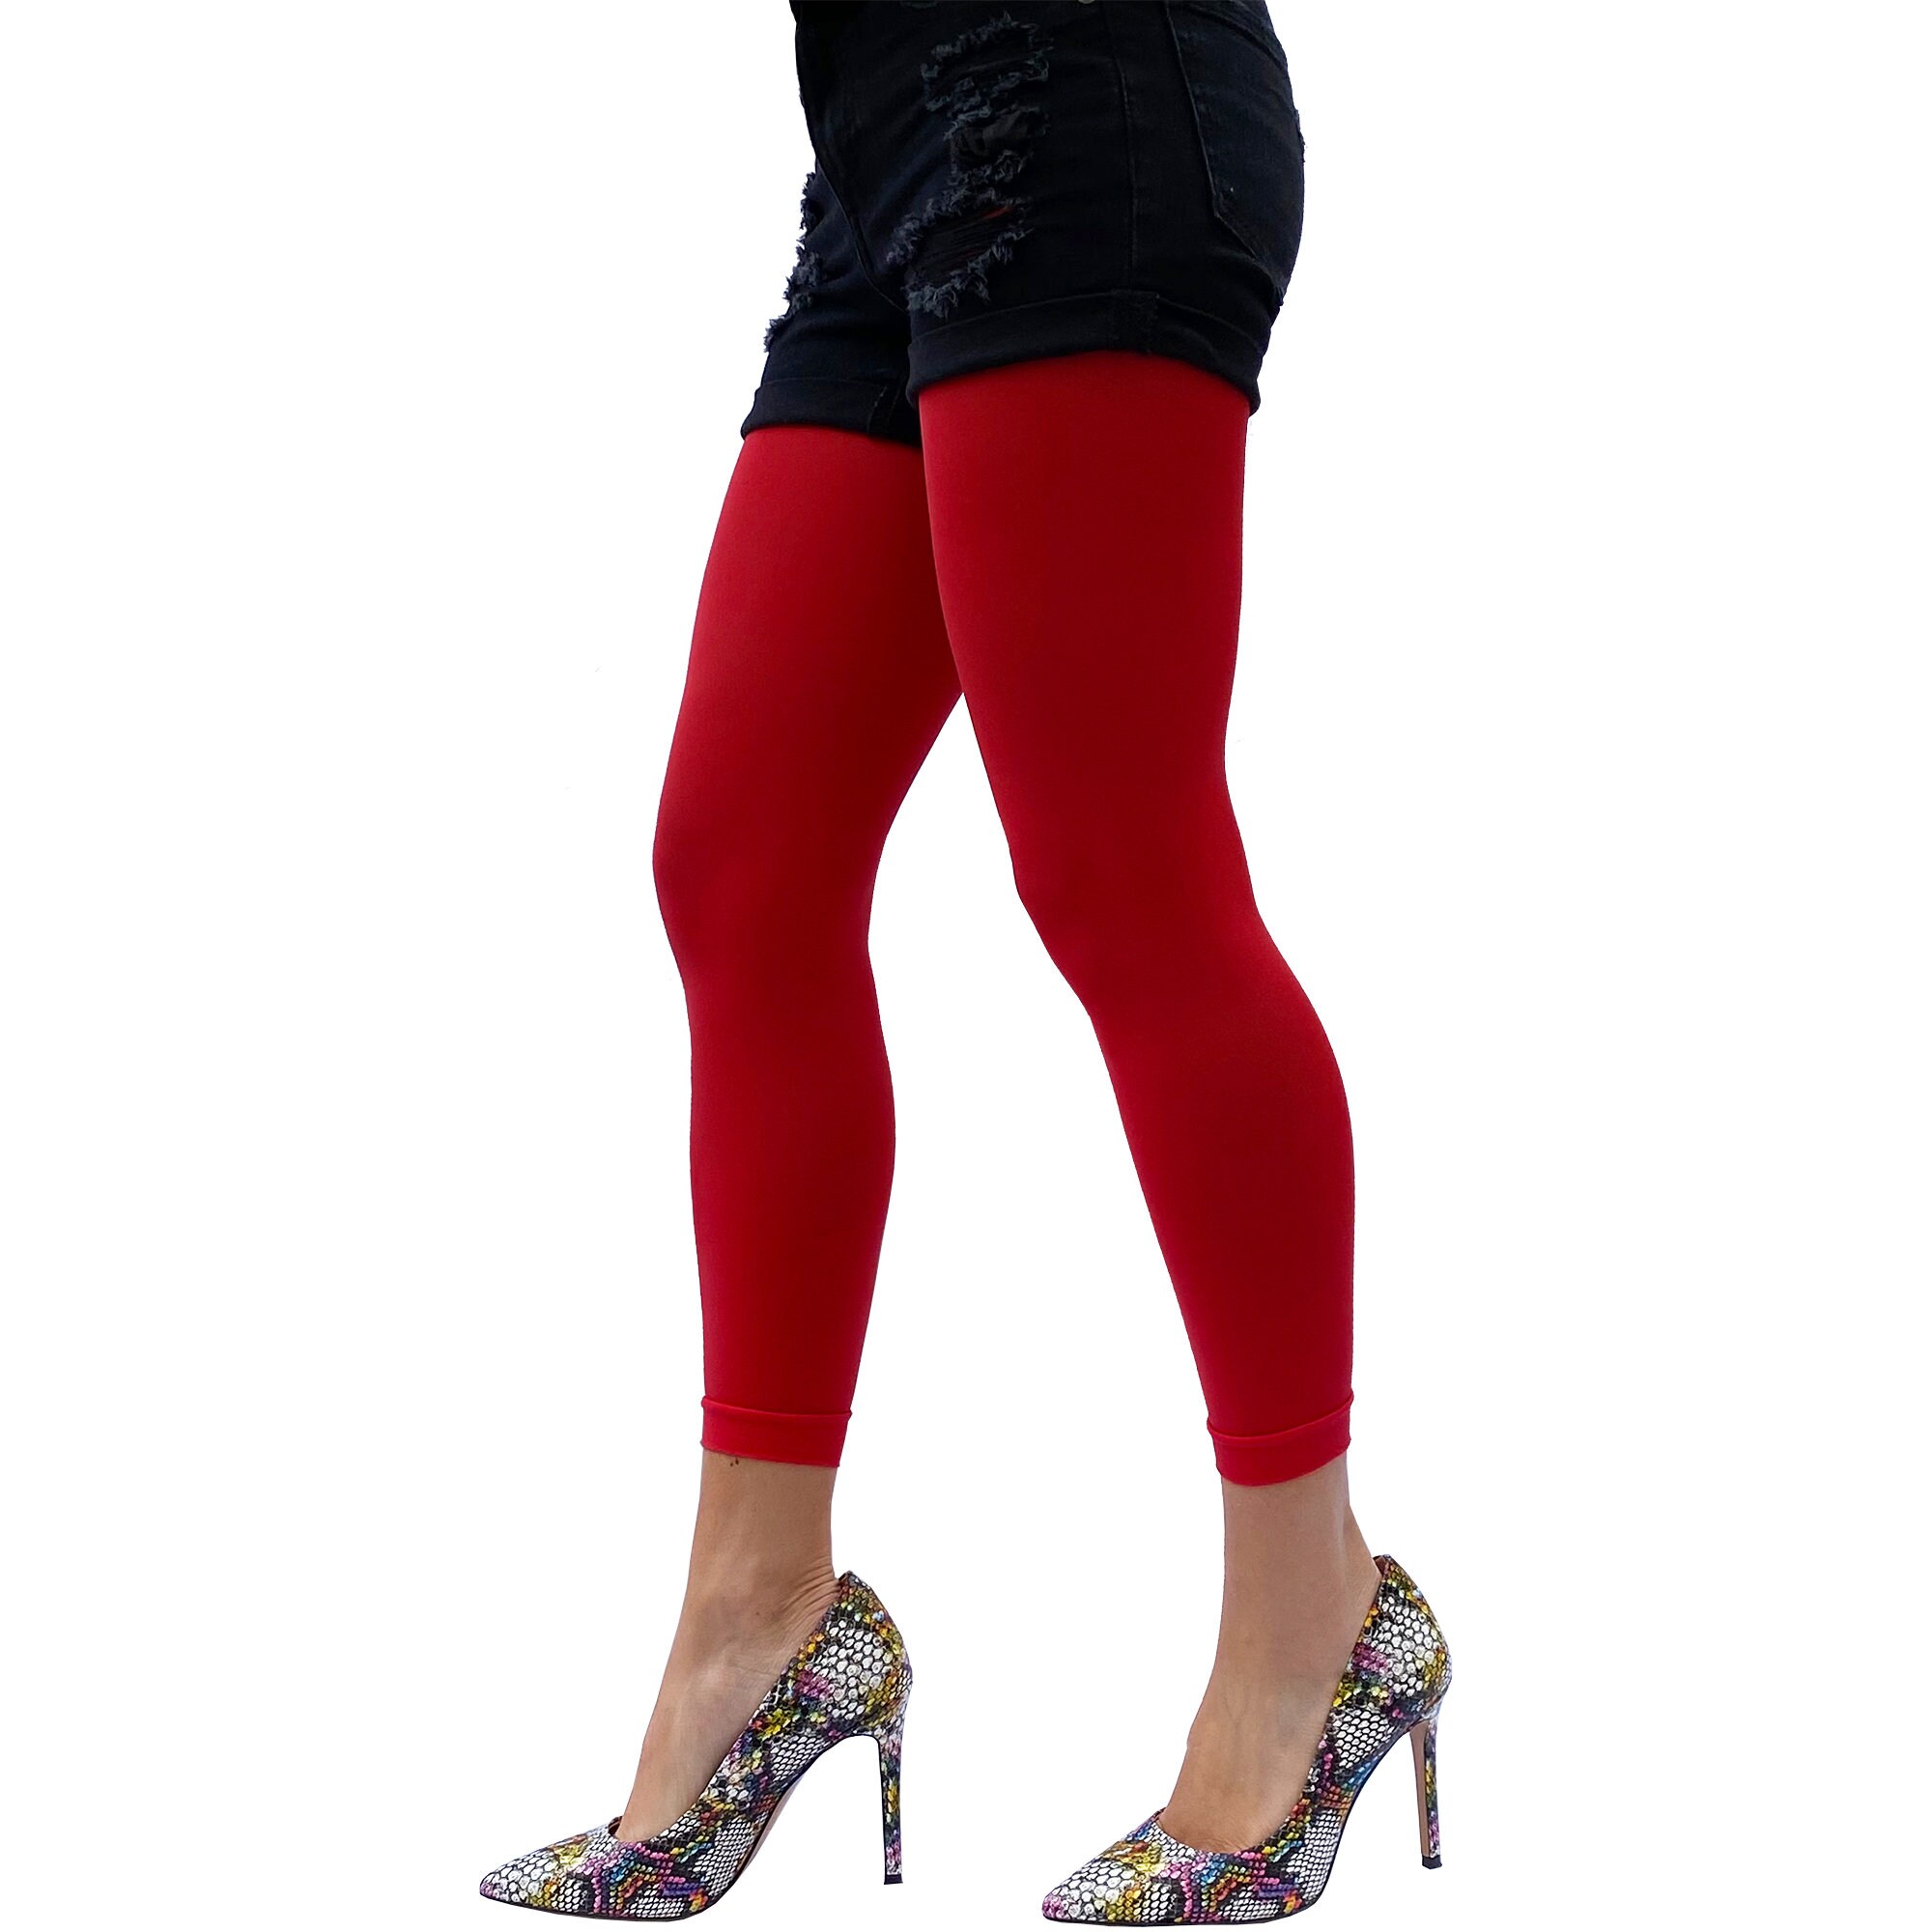 Women's Red Footless Tights for Women Ankle Length Pantyhose Plus